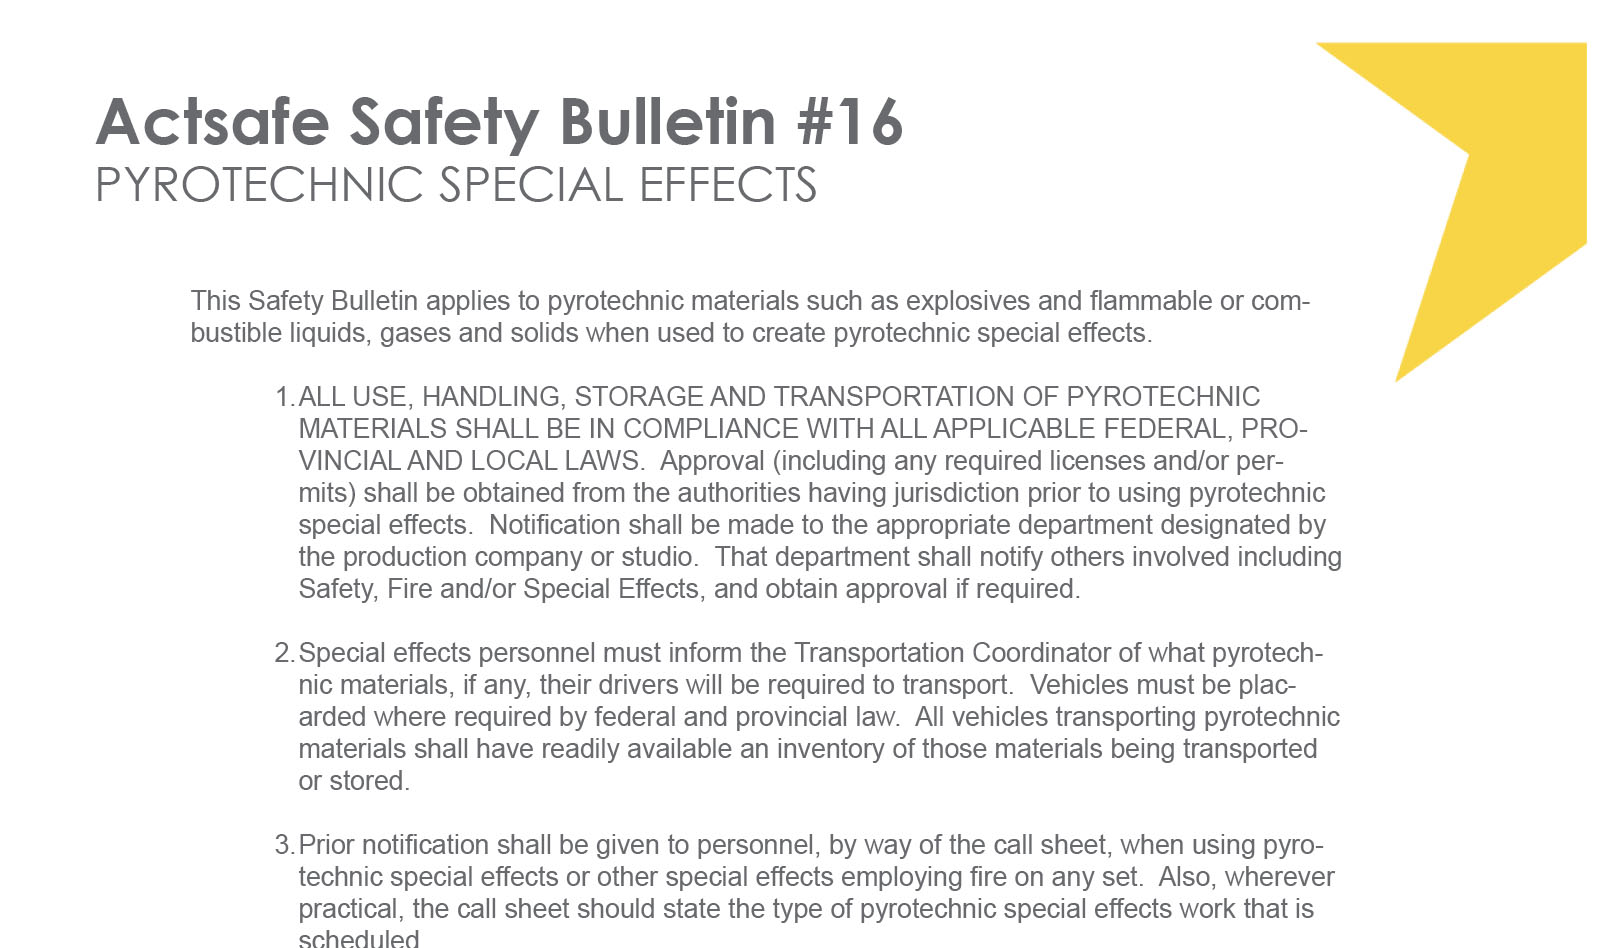 This Safety Bulletin applies to pyrotechnic materials such as explosives and flammable or combustible liquids, gases and solids when used to create pyrotechnic special effects